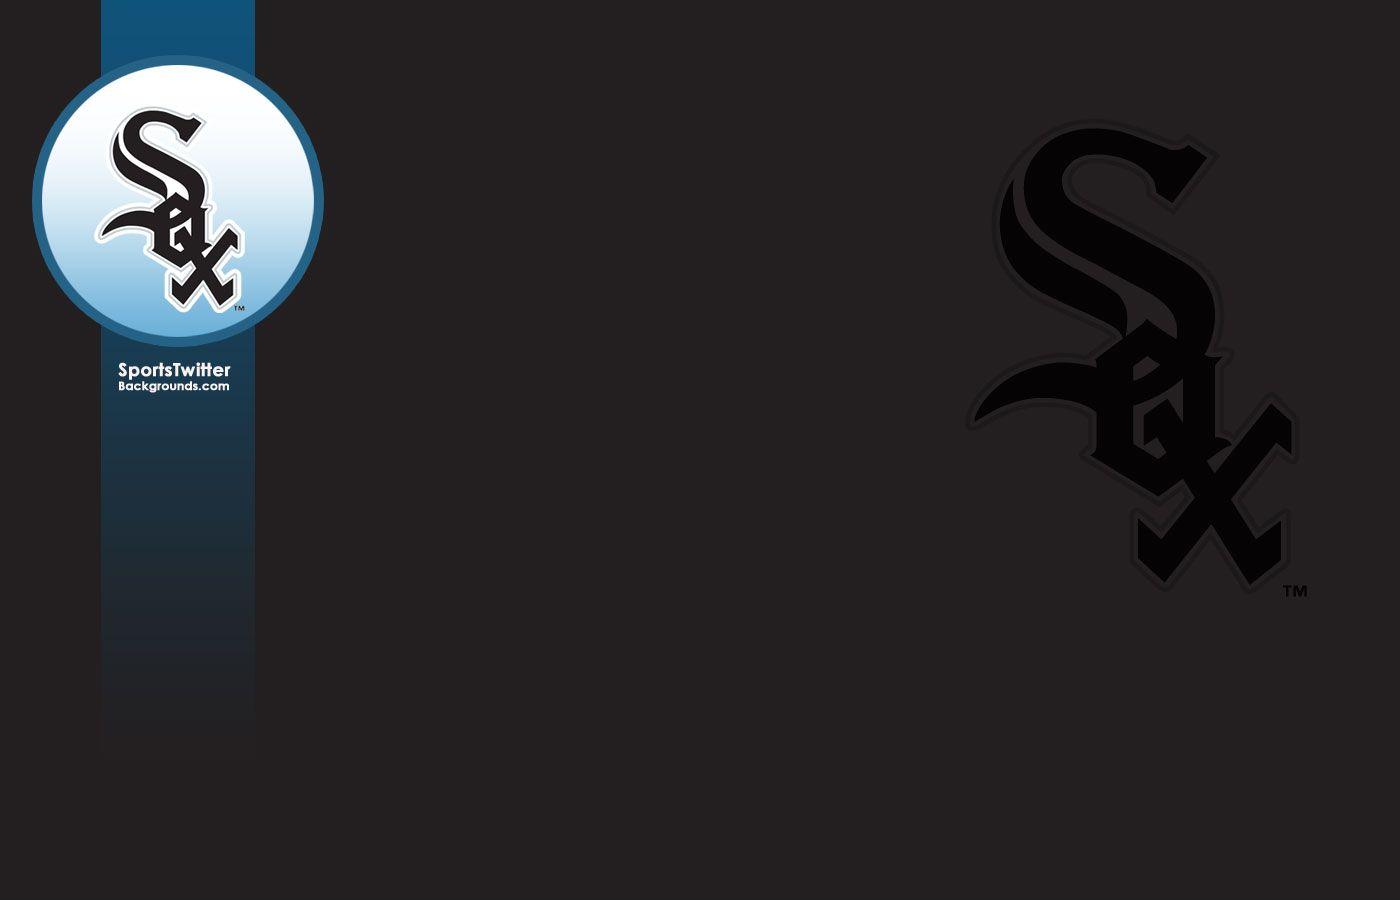 Perfect Chicago White Sox Wallpaper. World&;s Greatest Art Site